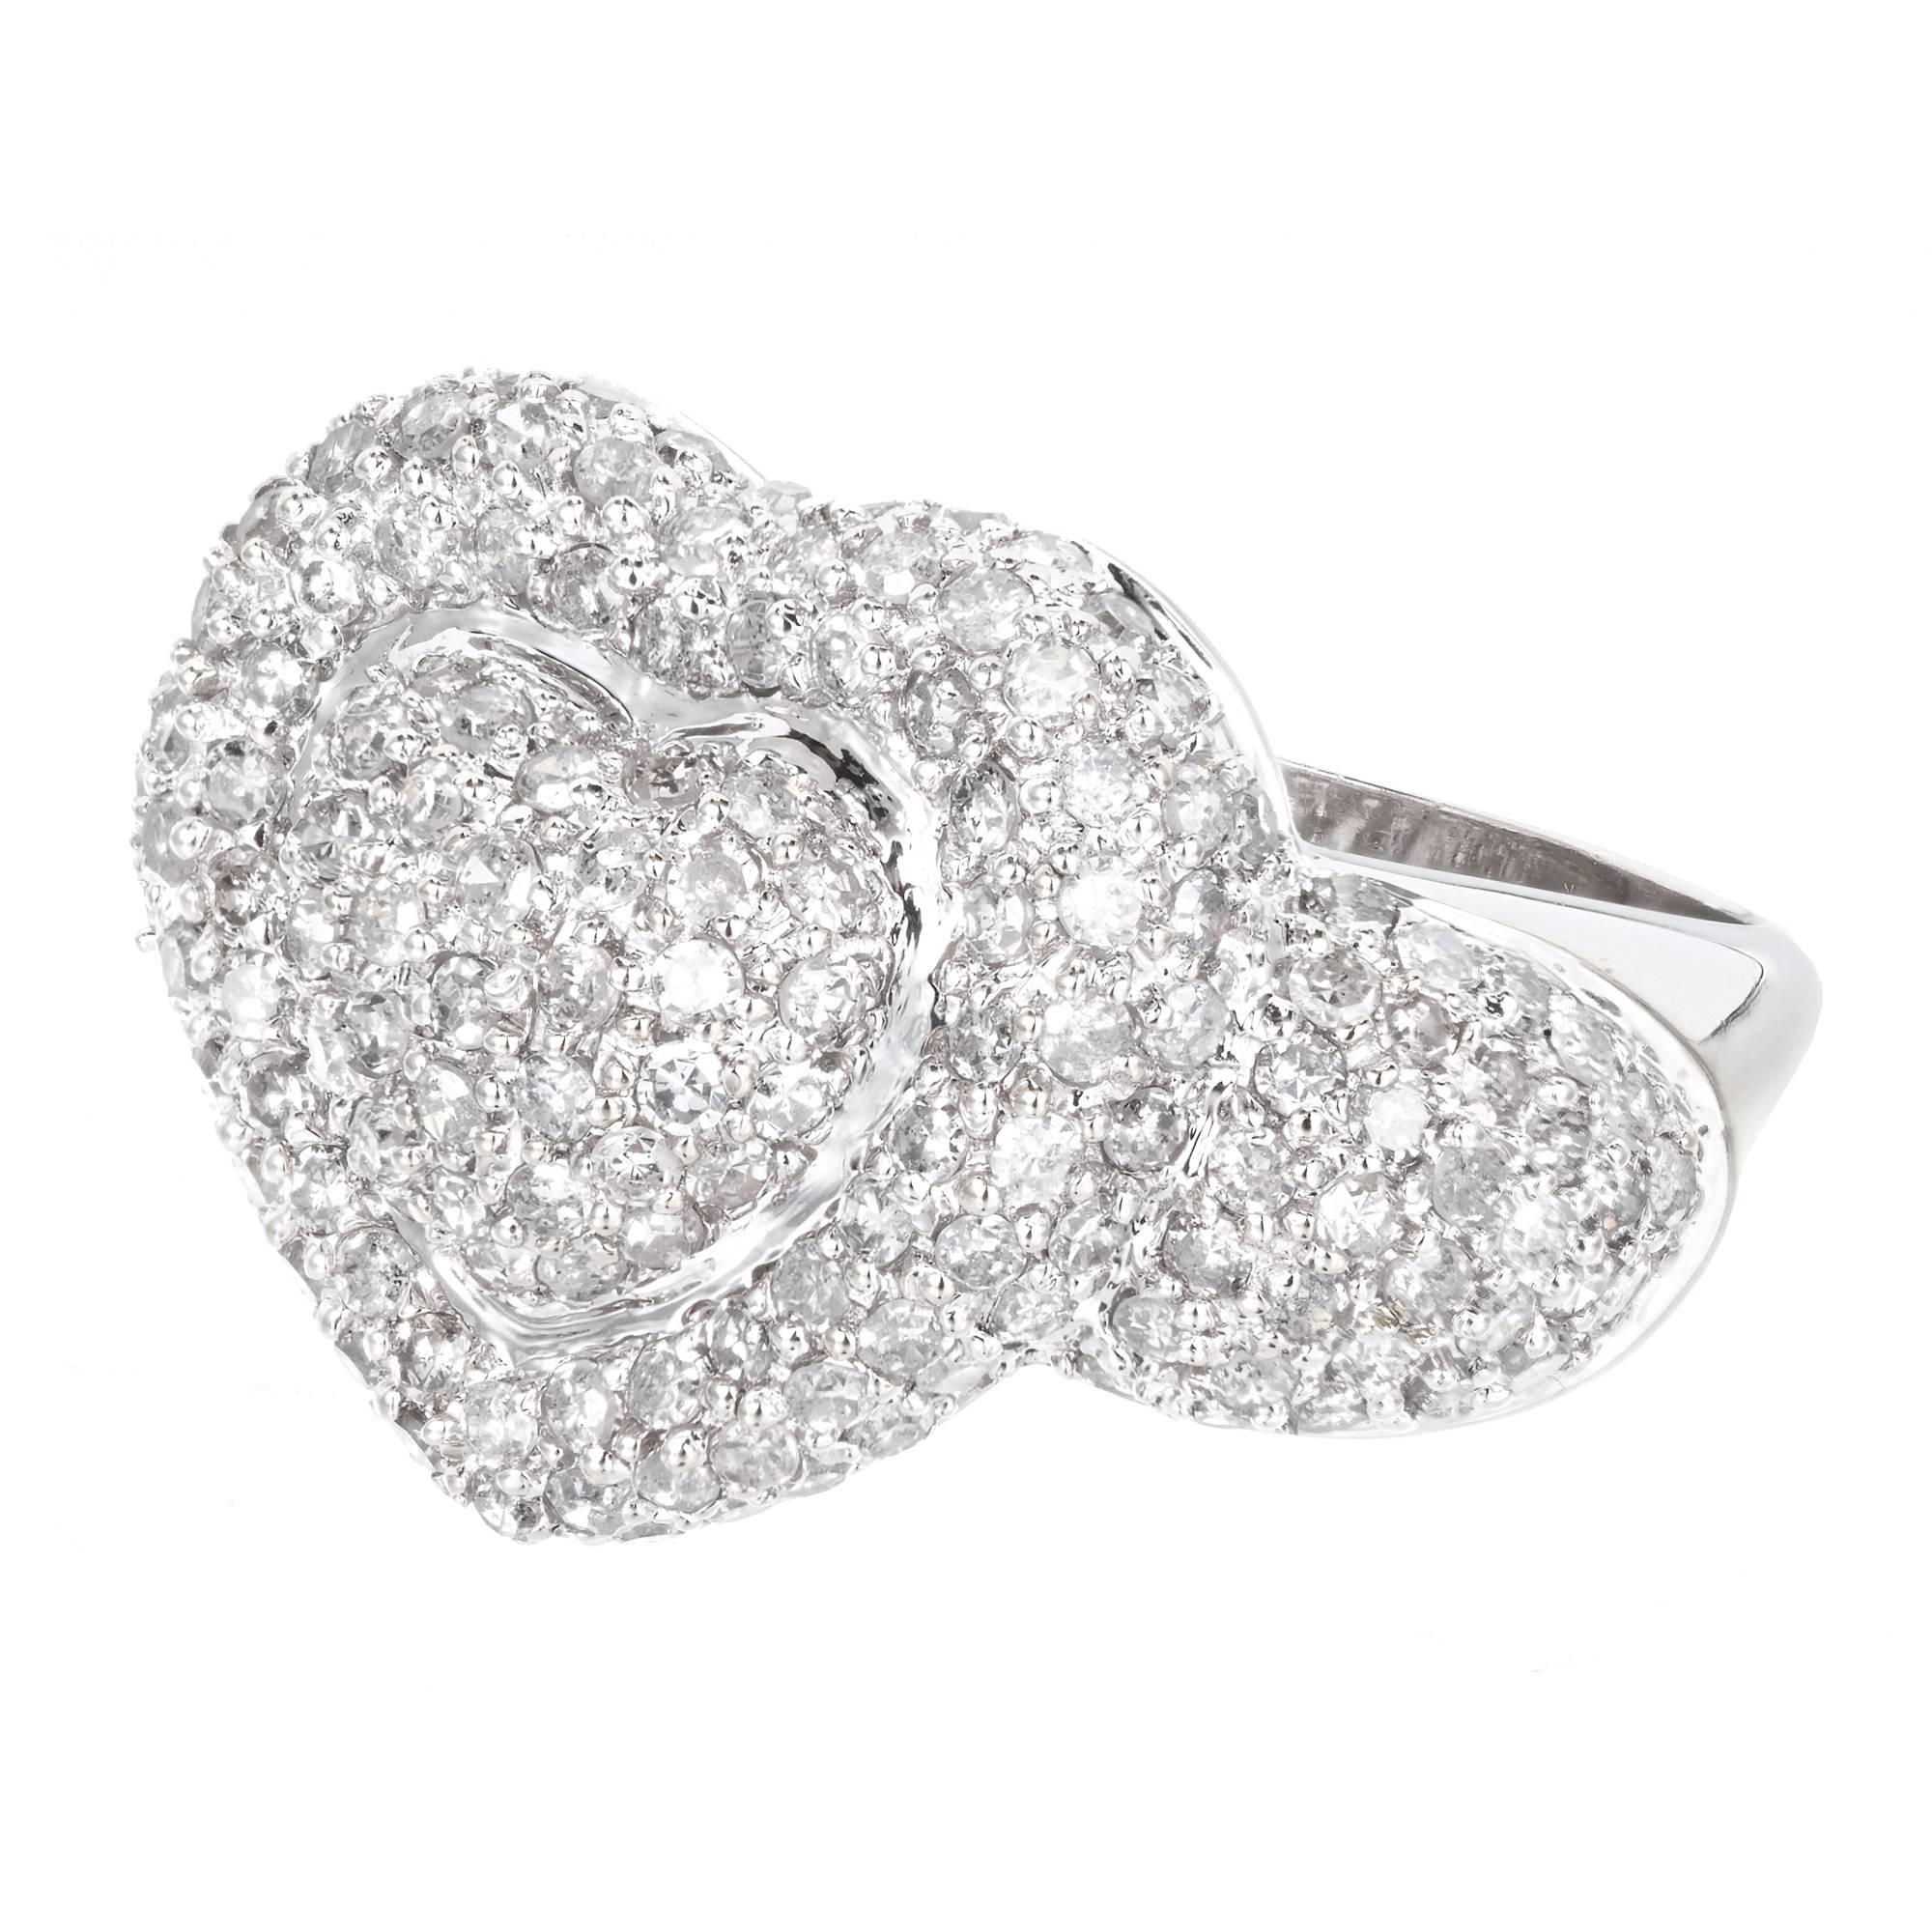 2.75 Carat Domed Diamond White Gold Heart Cocktail Ring 3